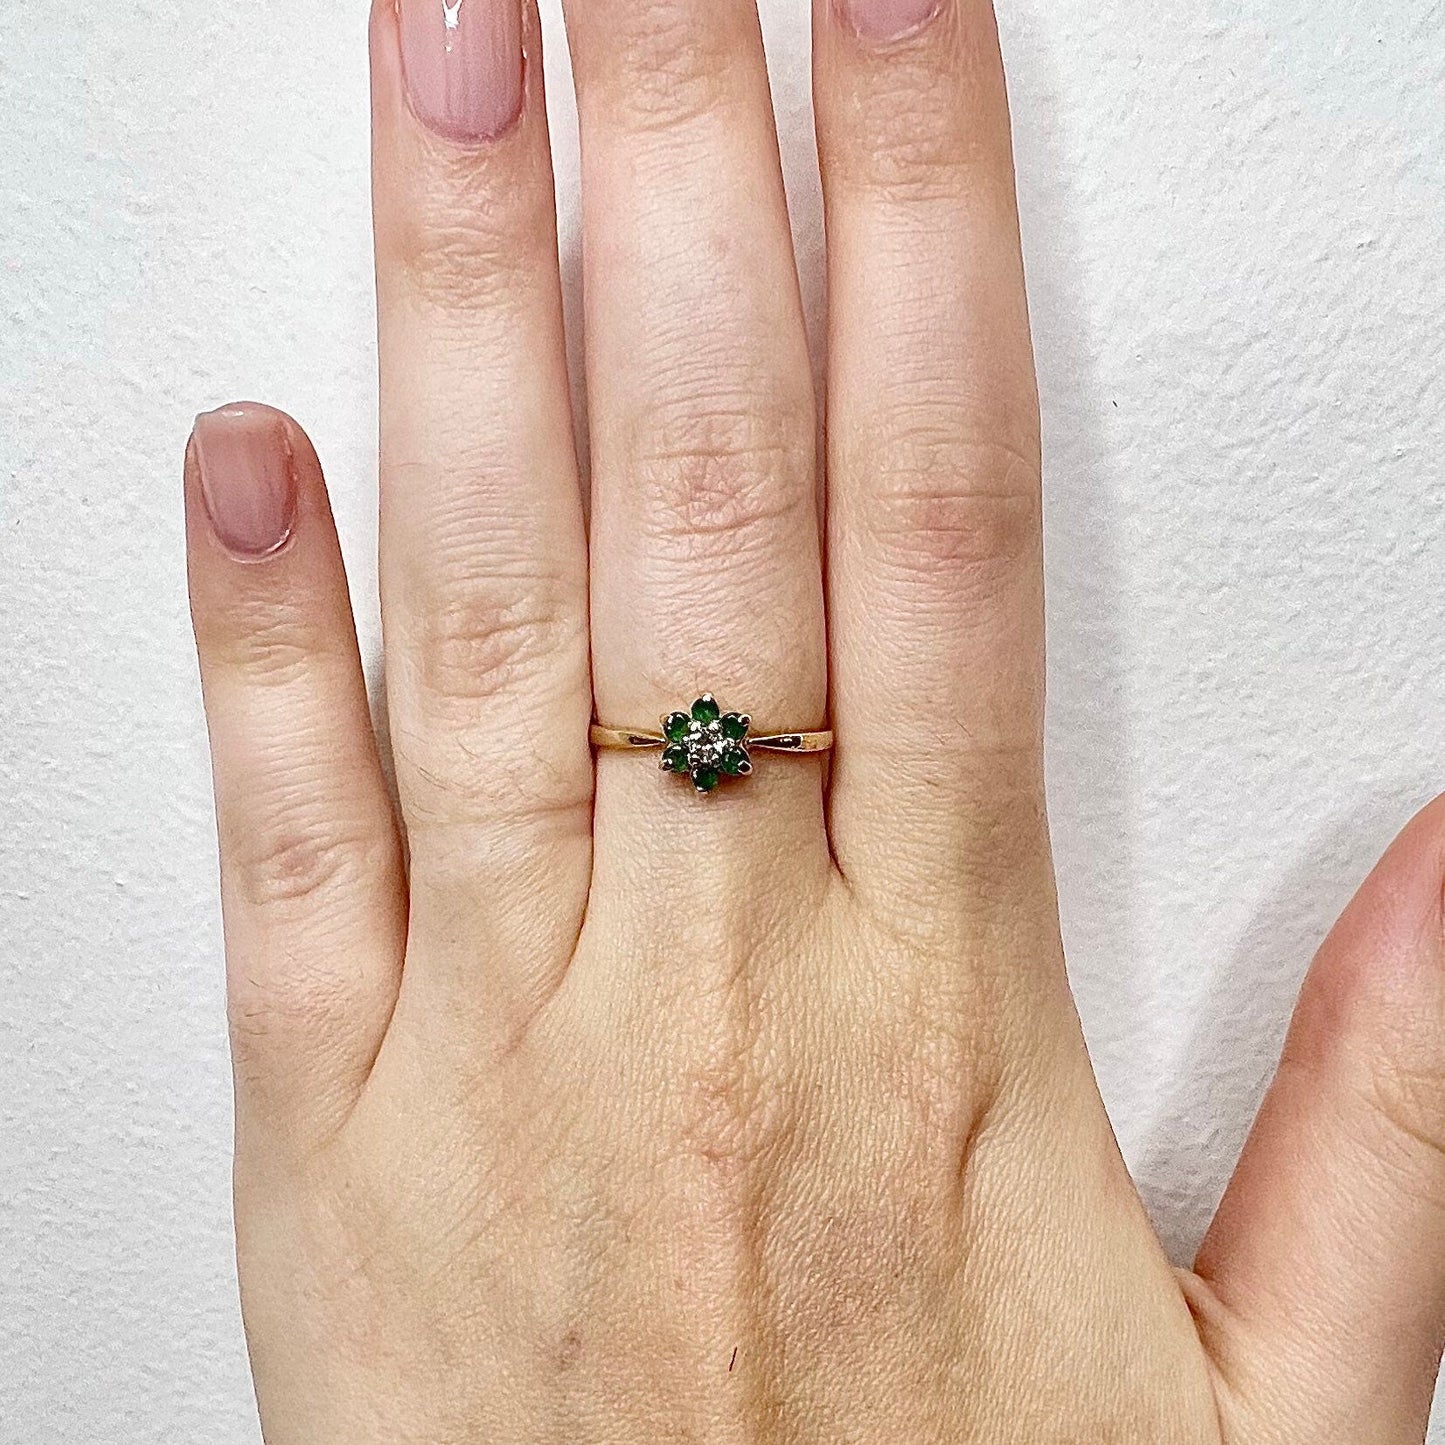 Vintage 14K Diamond & Natural Emerald Halo Ring - Yellow Gold Cocktail Ring - April May Brithstone - Holiday Gift For Her - Jewelry Sale